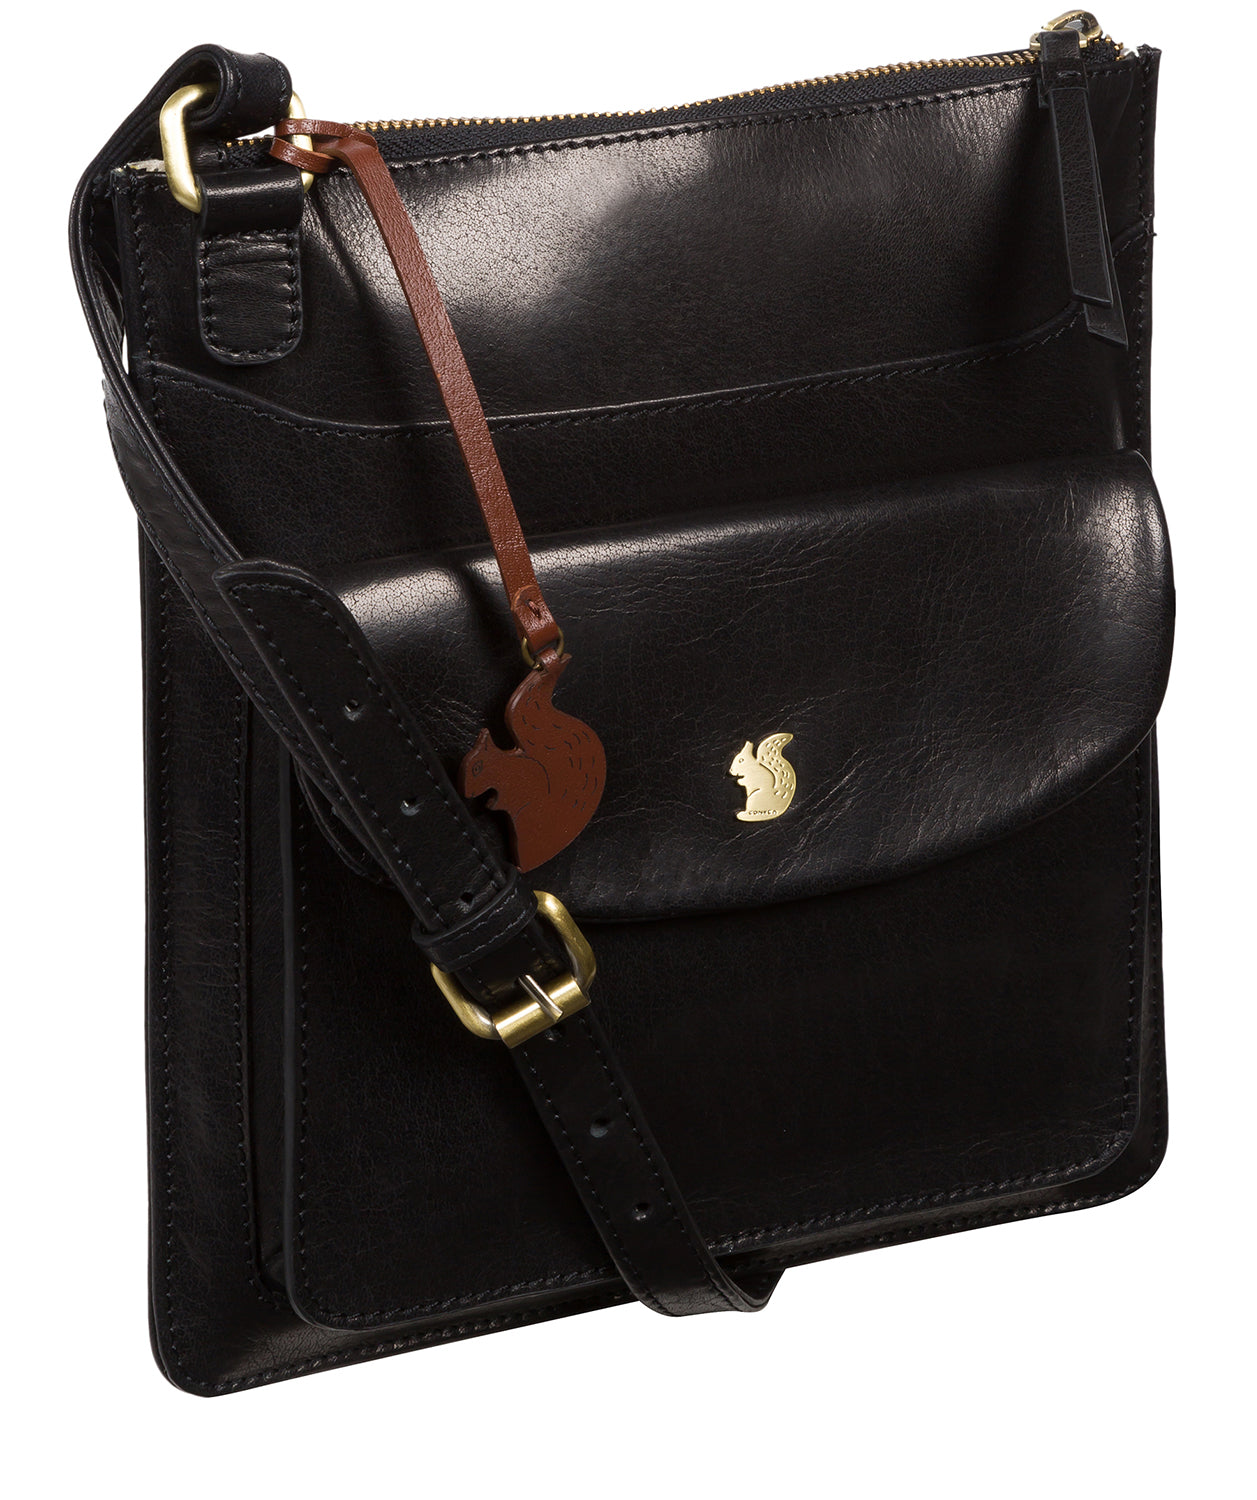 Conkca London Originals Collection #product-type#: 'Lauryn' Black Leather Cross Body Bag